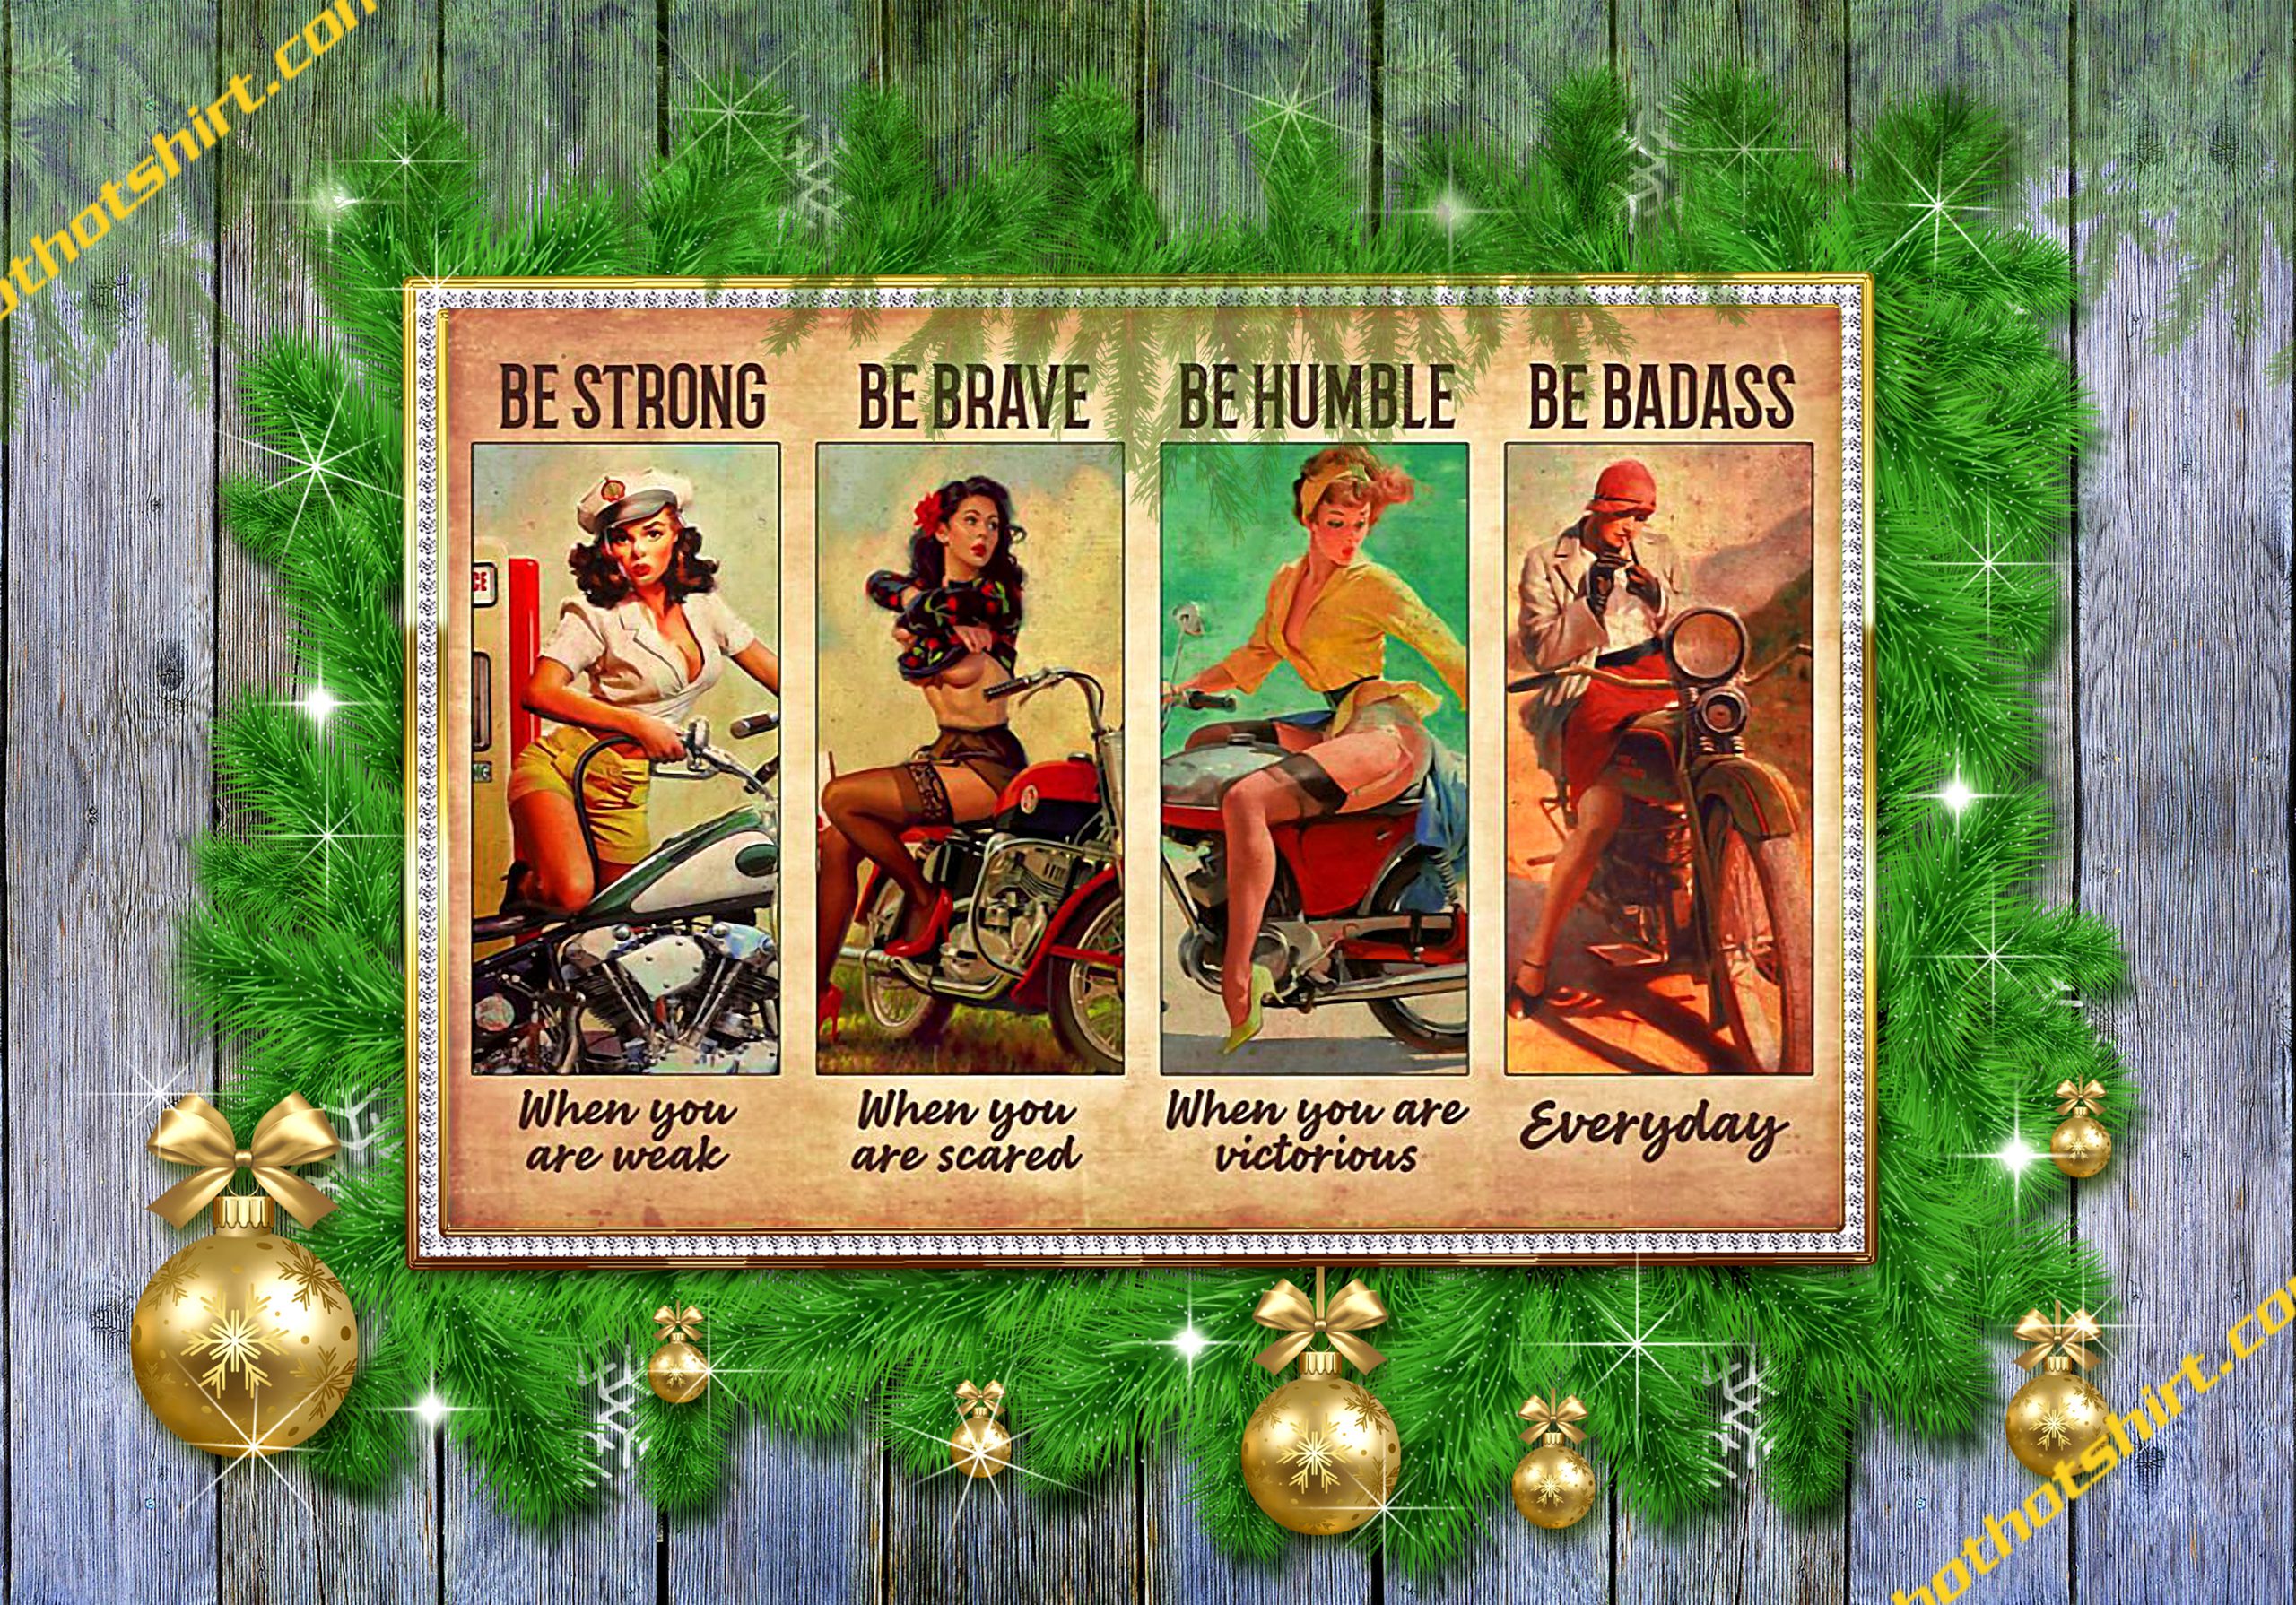 Biker girl be strong be brave be humble be badass poster